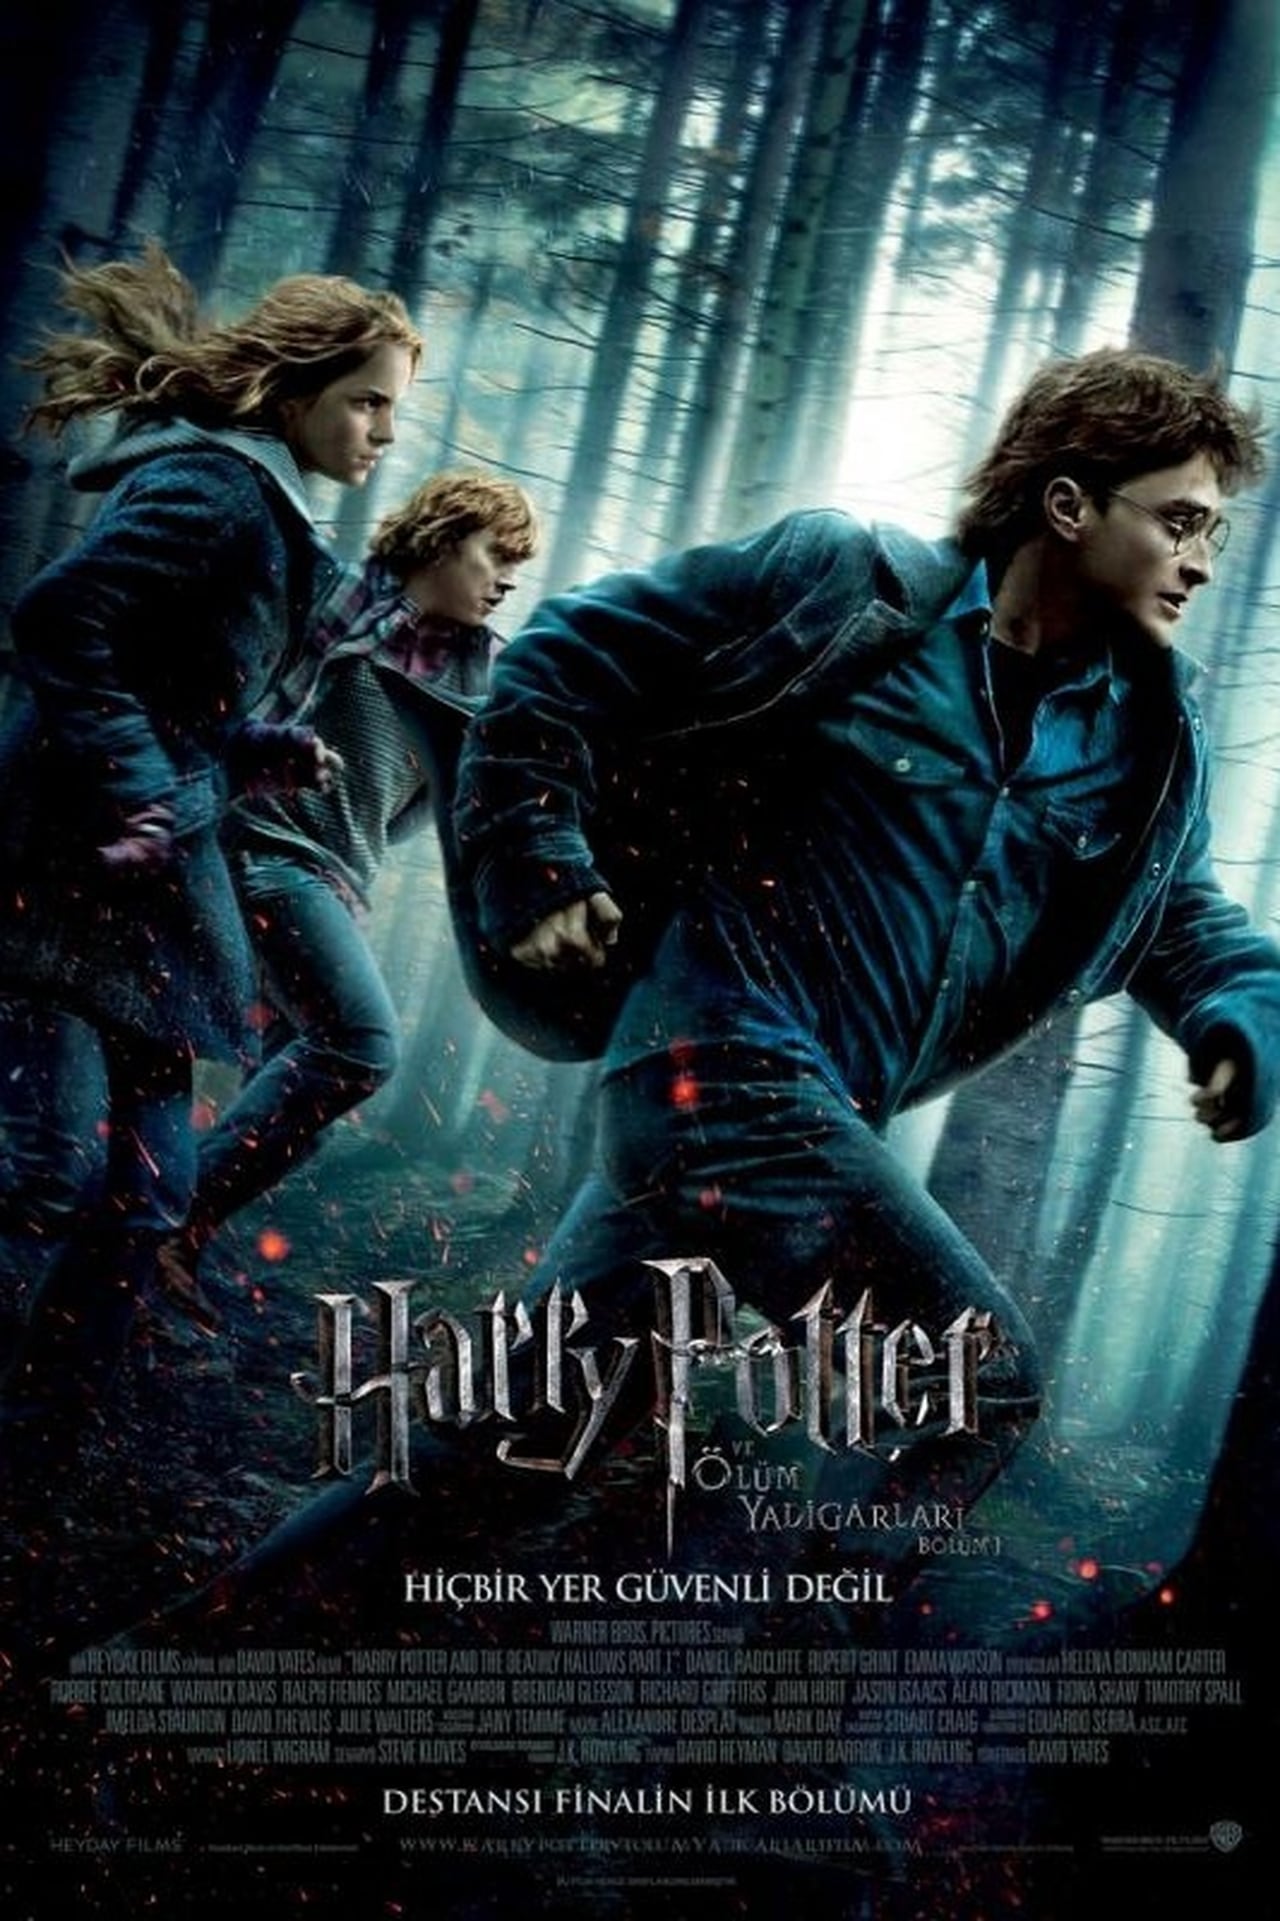 Harry Potter and the Deathly Hallows: Part 1 (2010) 384Kbps 23.976Fps 48Khz 5.1Ch DVD Turkish Audio TAC